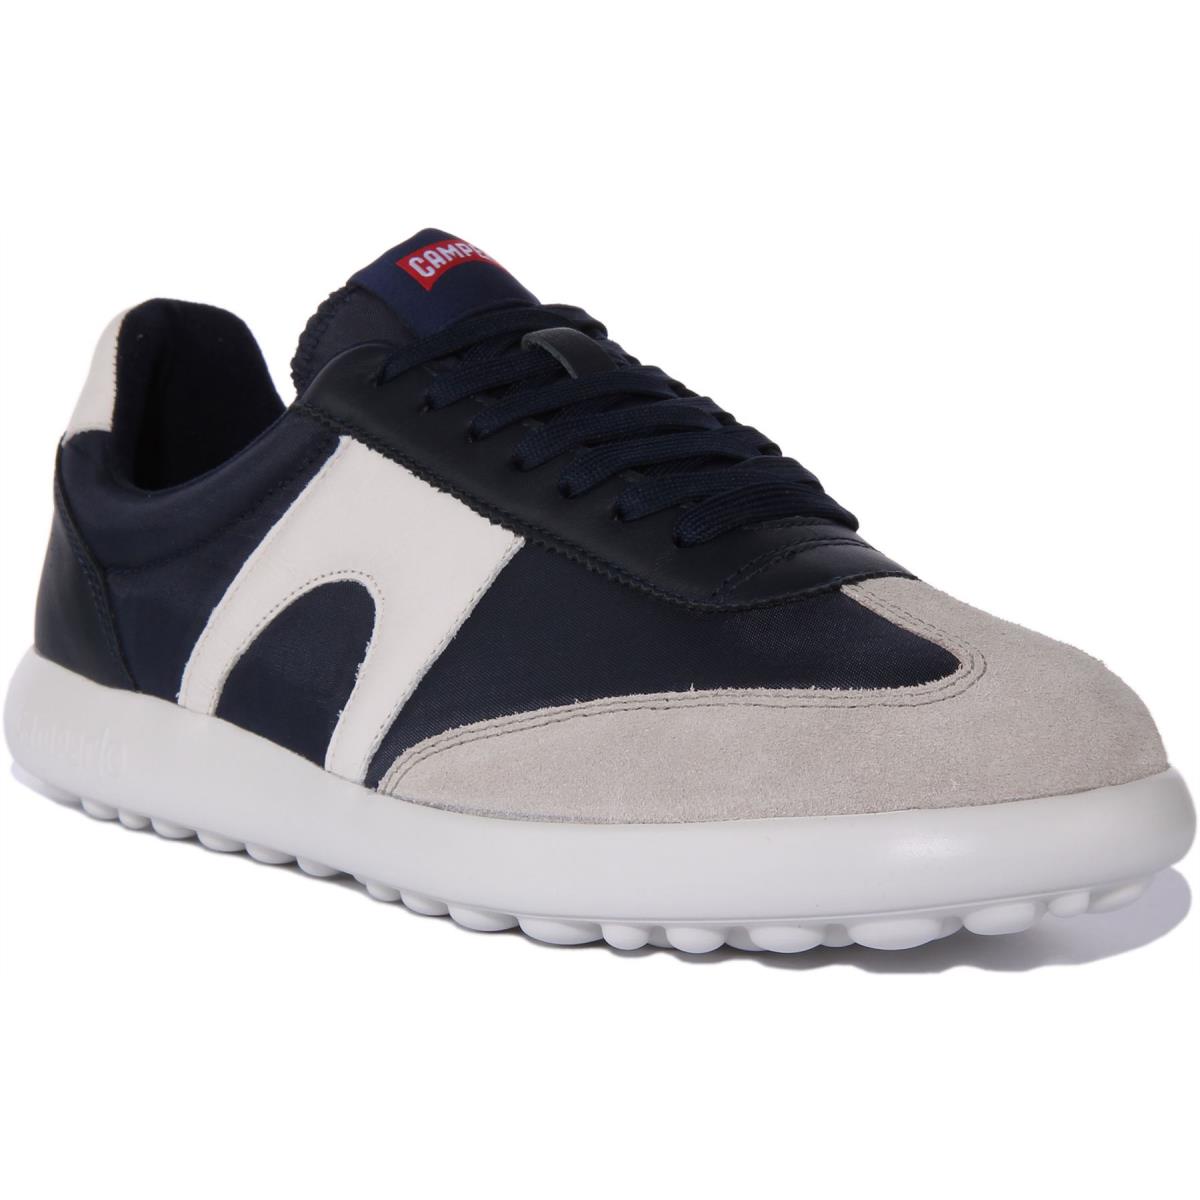 Camper Pelotas Xlf Mens Lace Up Leather Sneakers In Navy Grey Size US 7 - 13 NAVY GREY